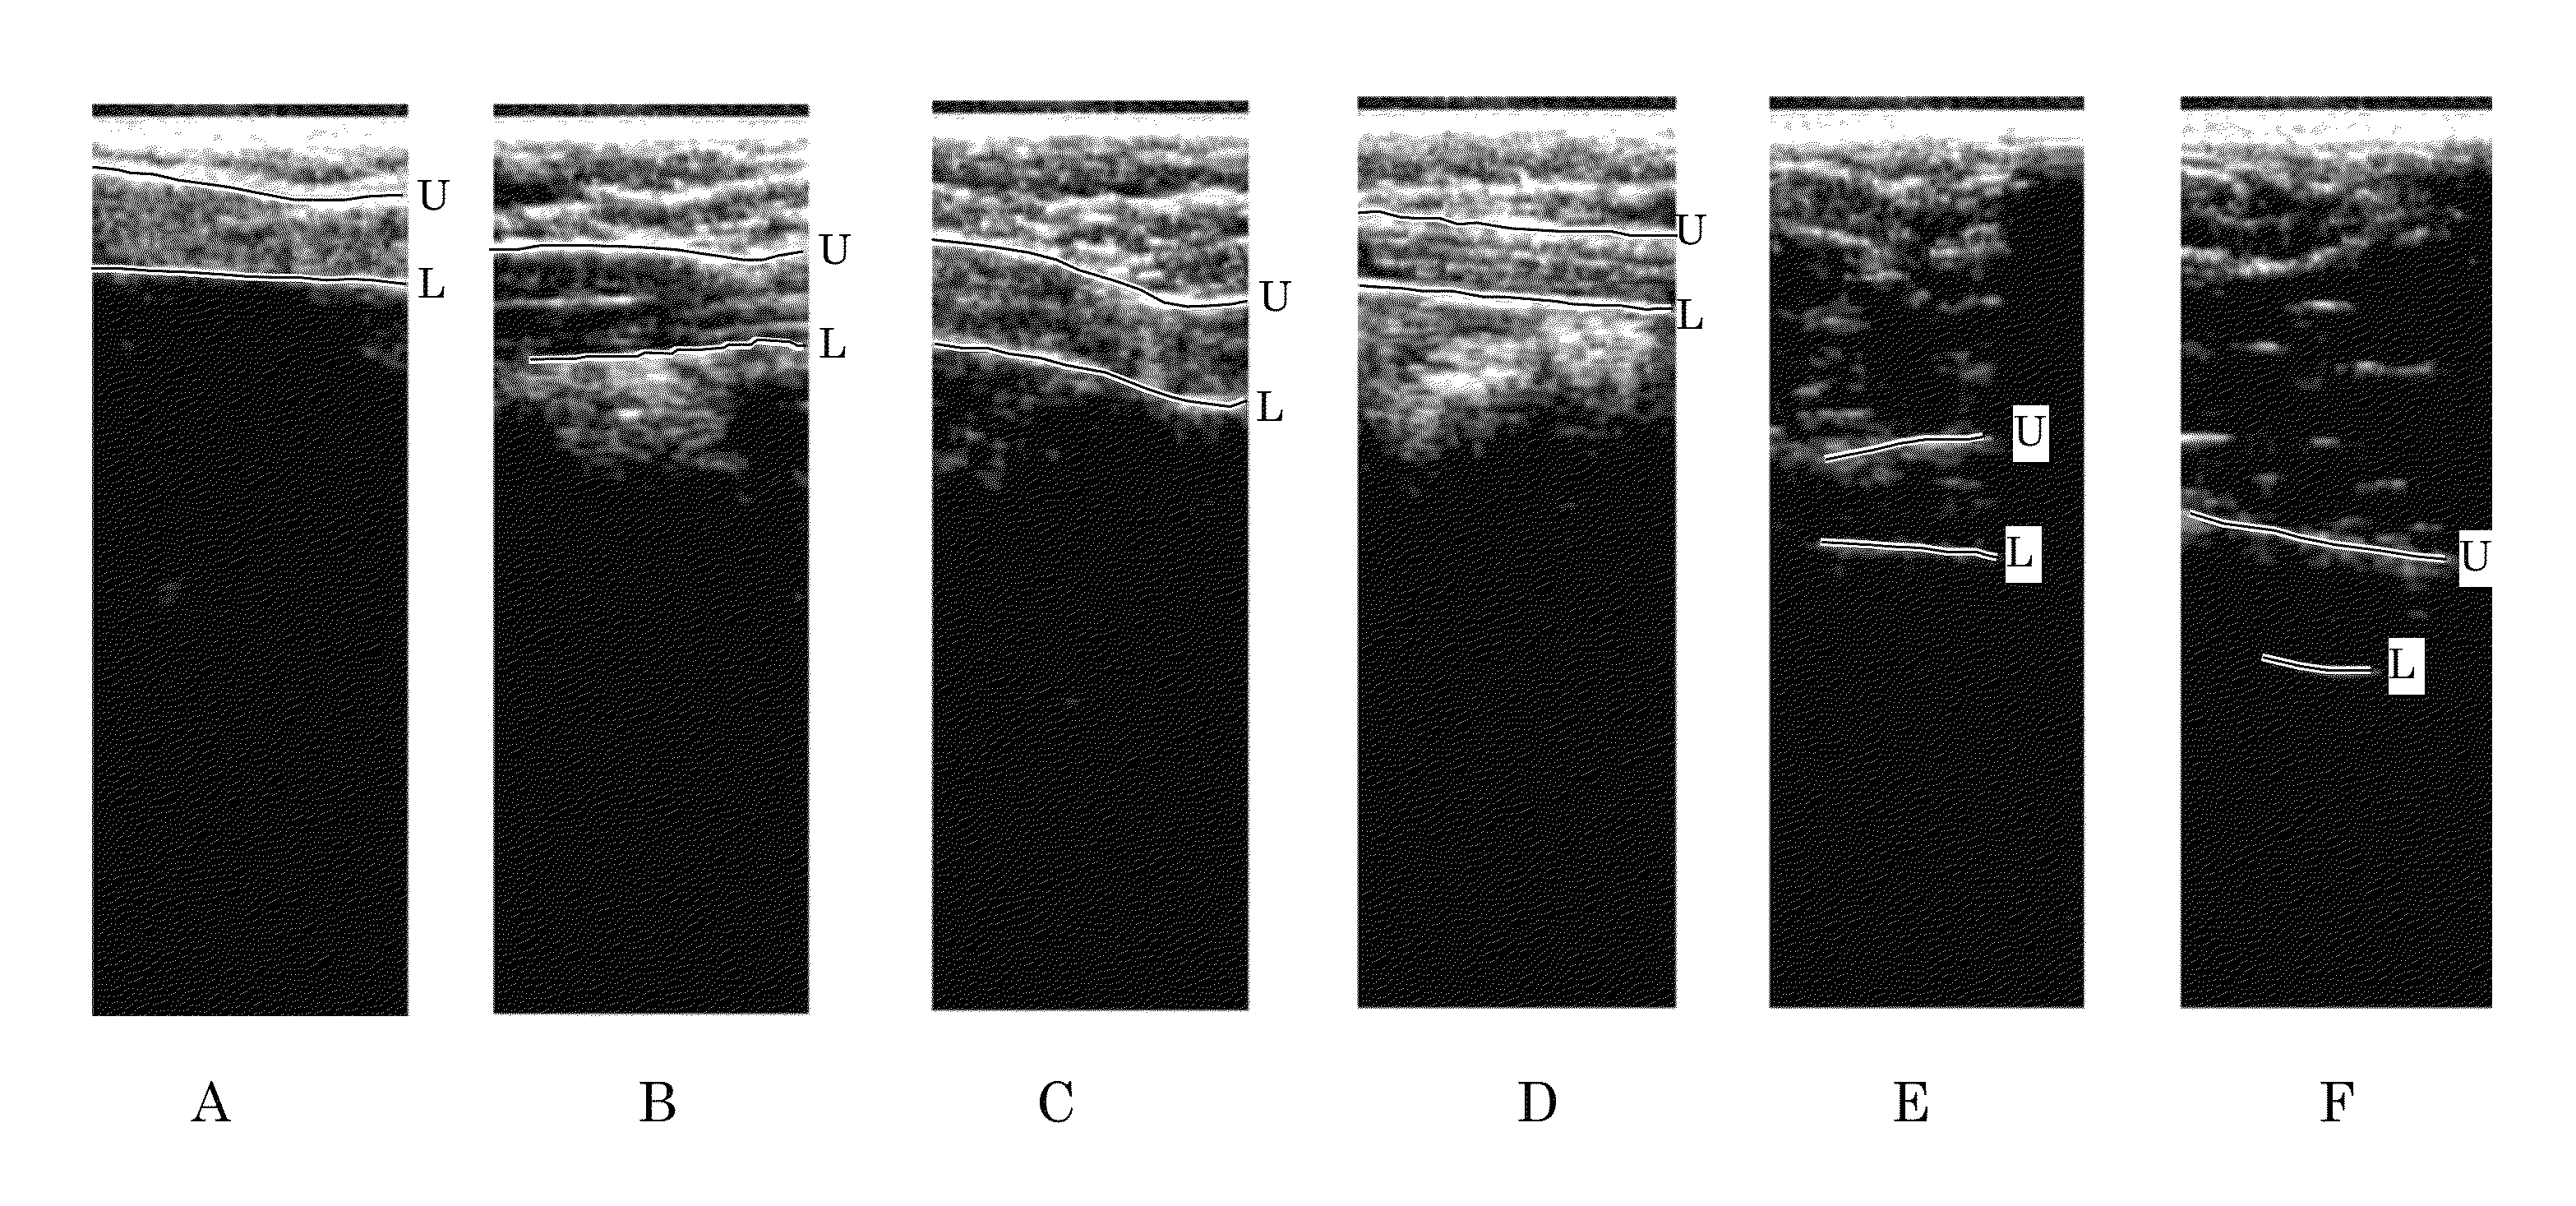 Orientation-aware average intensity histogram to indicate object boundary depth in ultrasound images